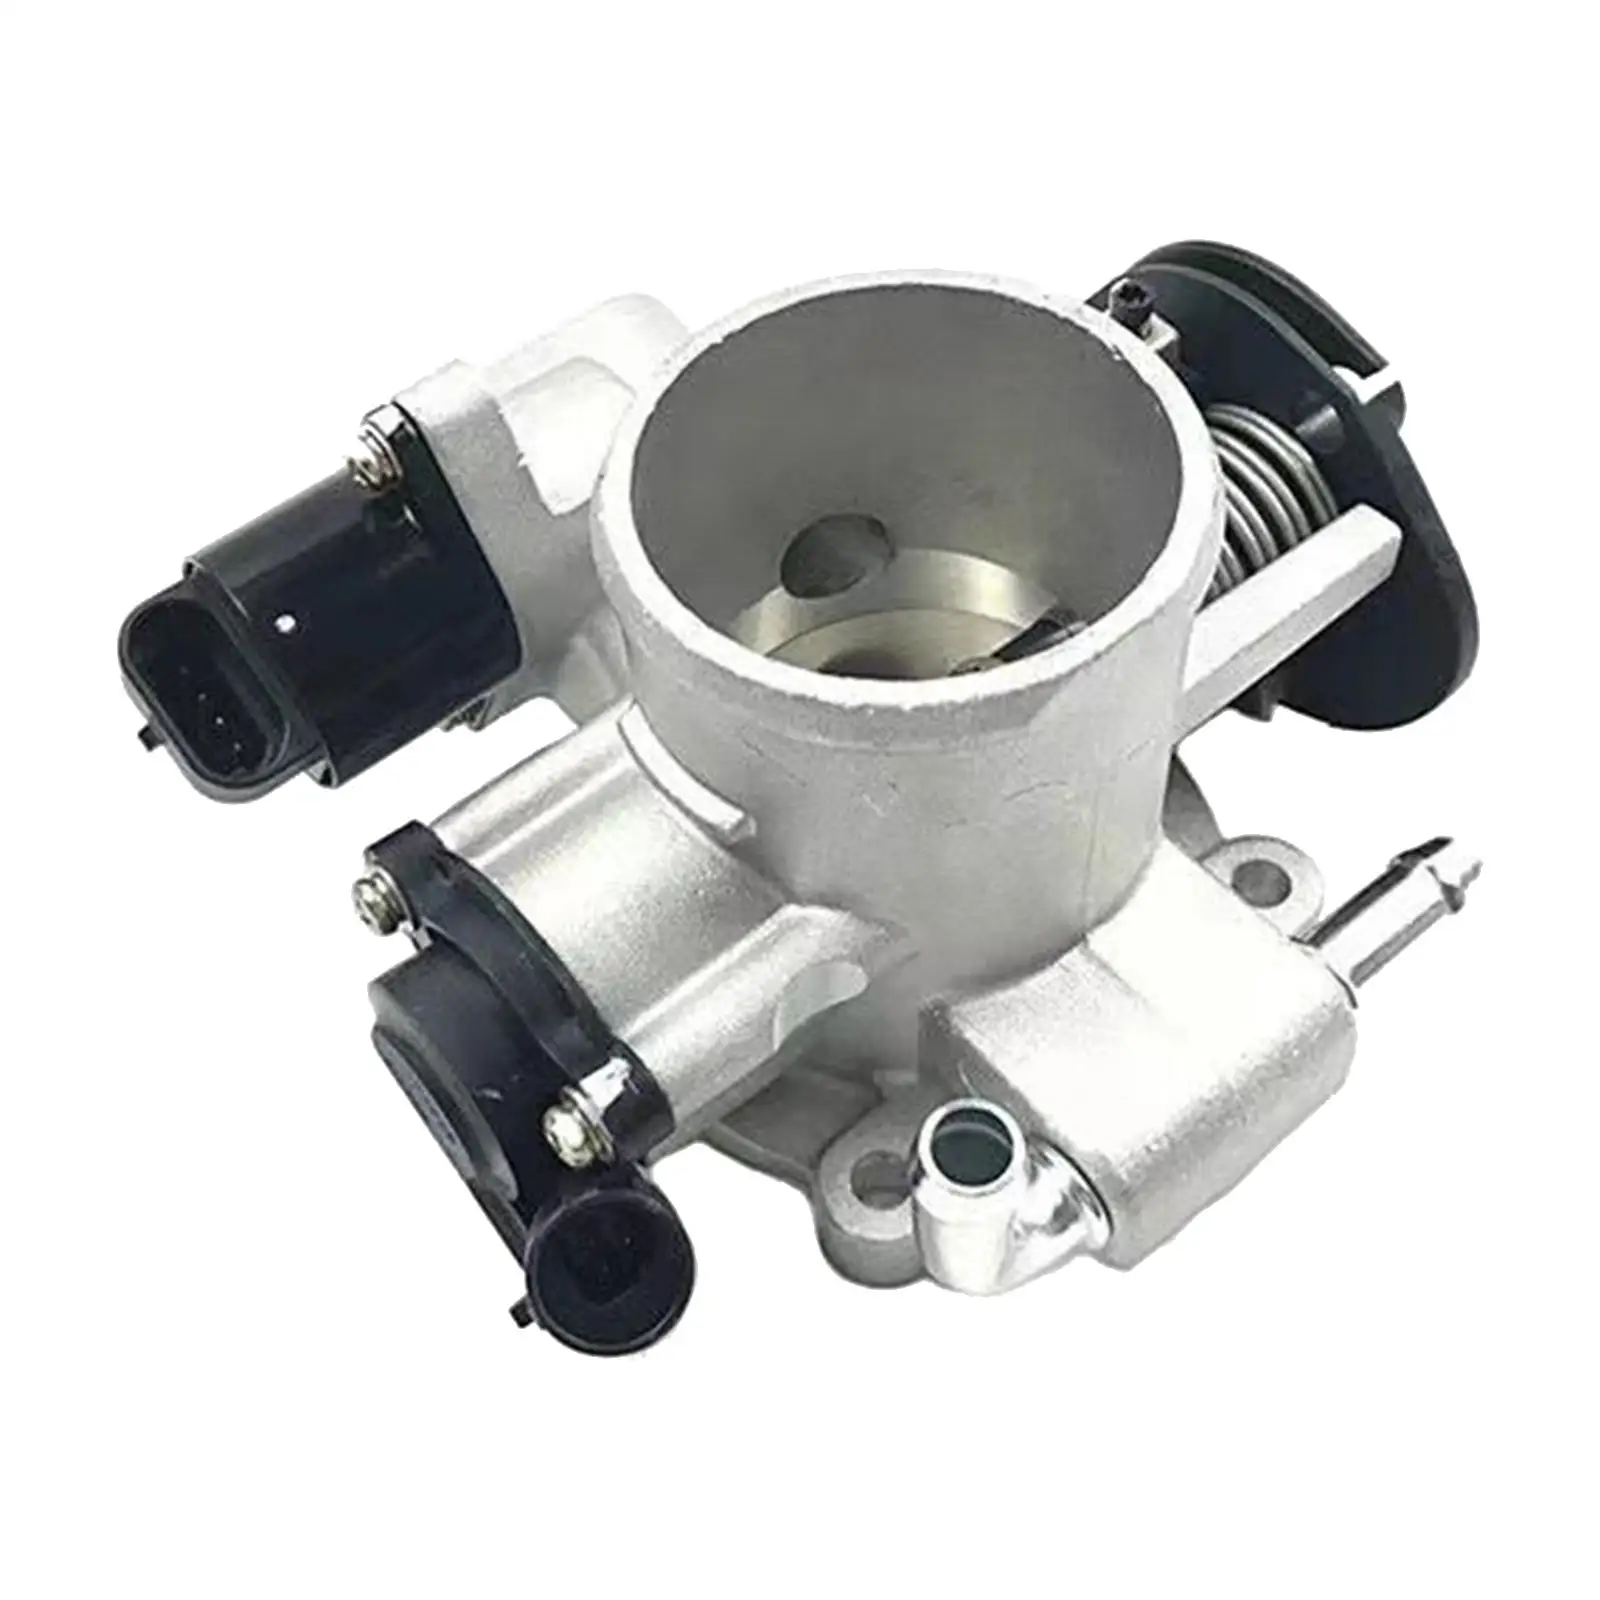 Electronic Throttle Body 96378856 for Daewoo Vehicle Repair Parts